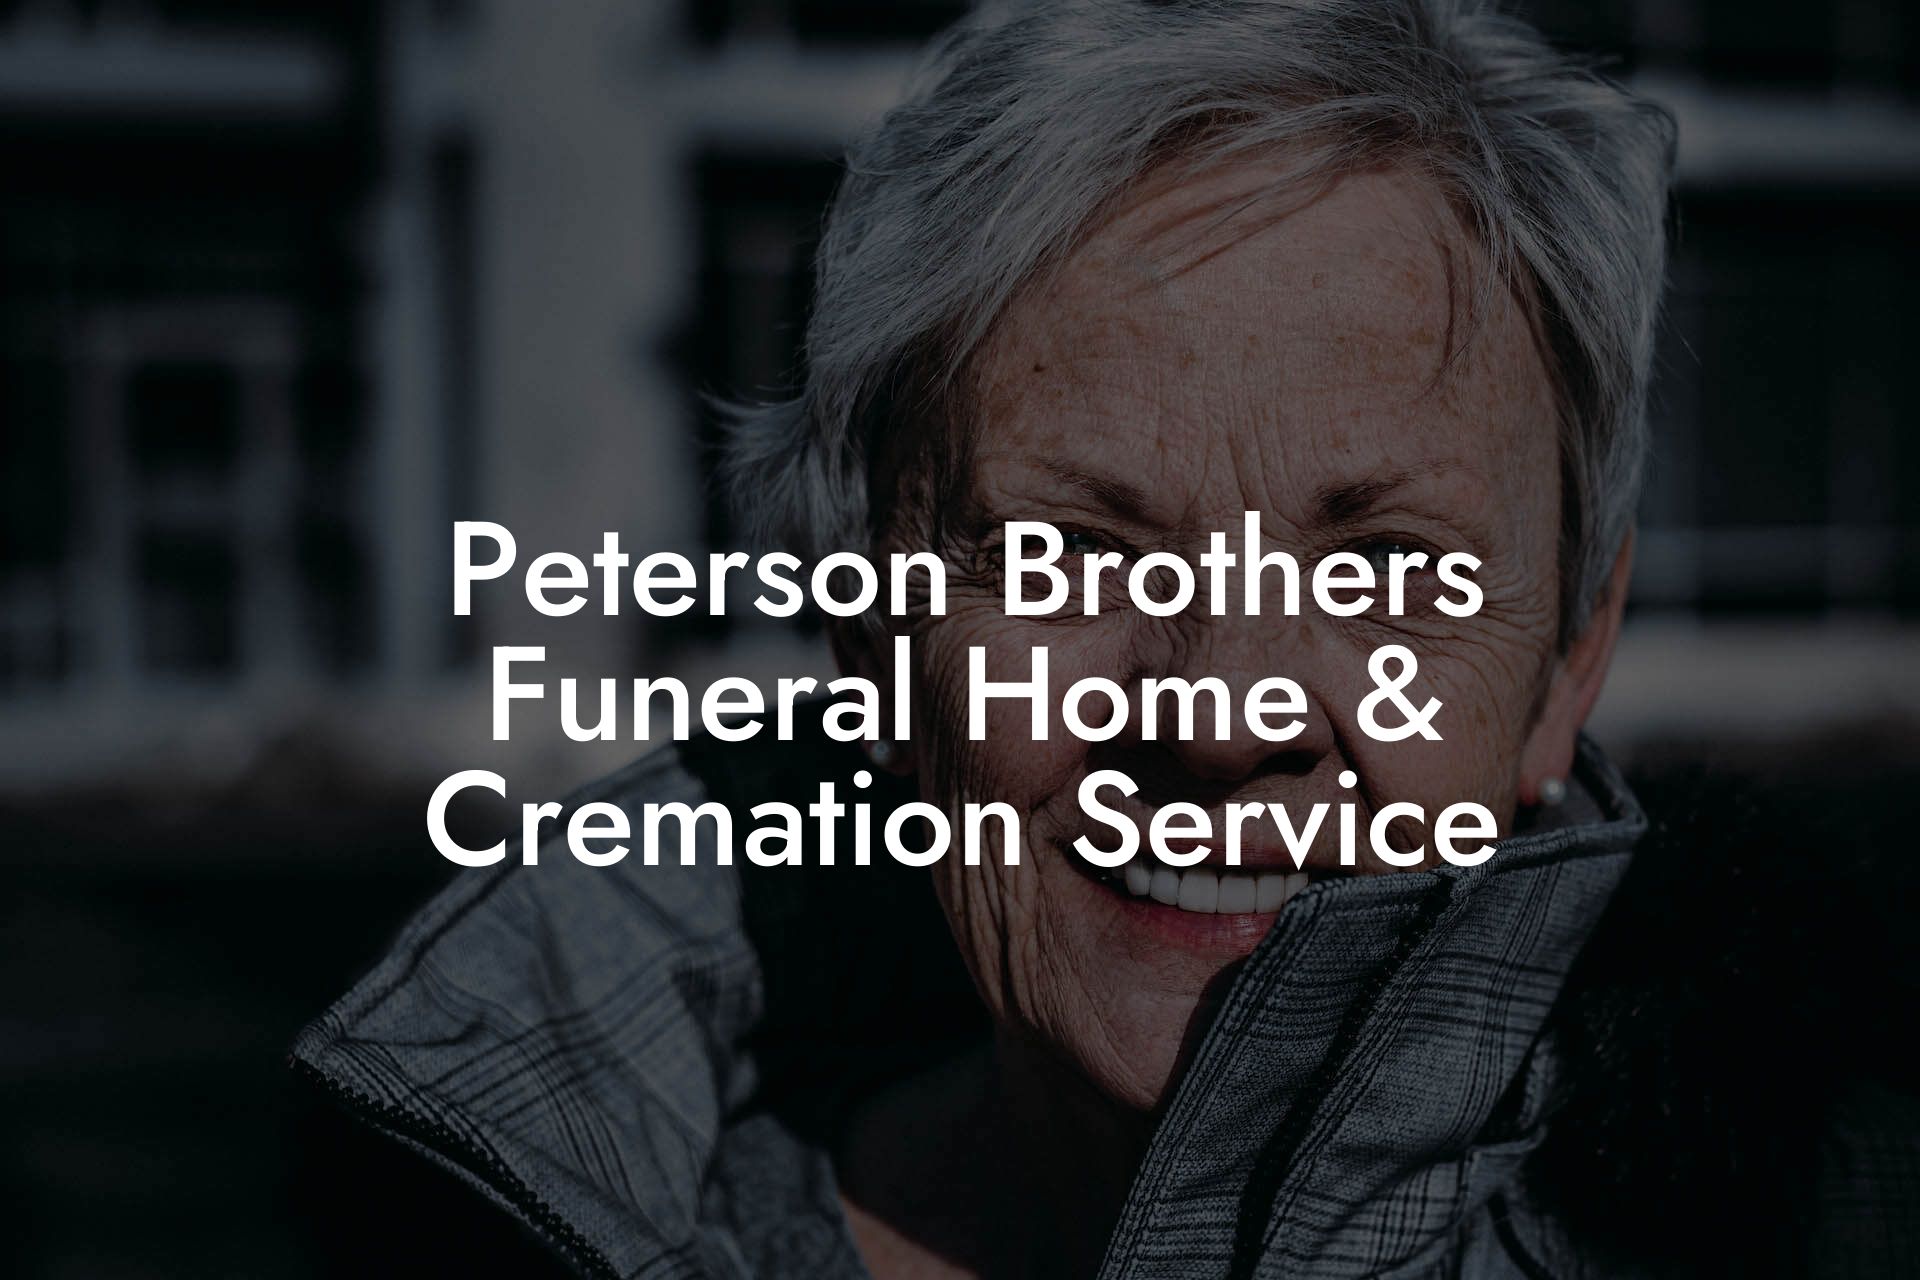 Peterson Brothers Funeral Home & Cremation Service